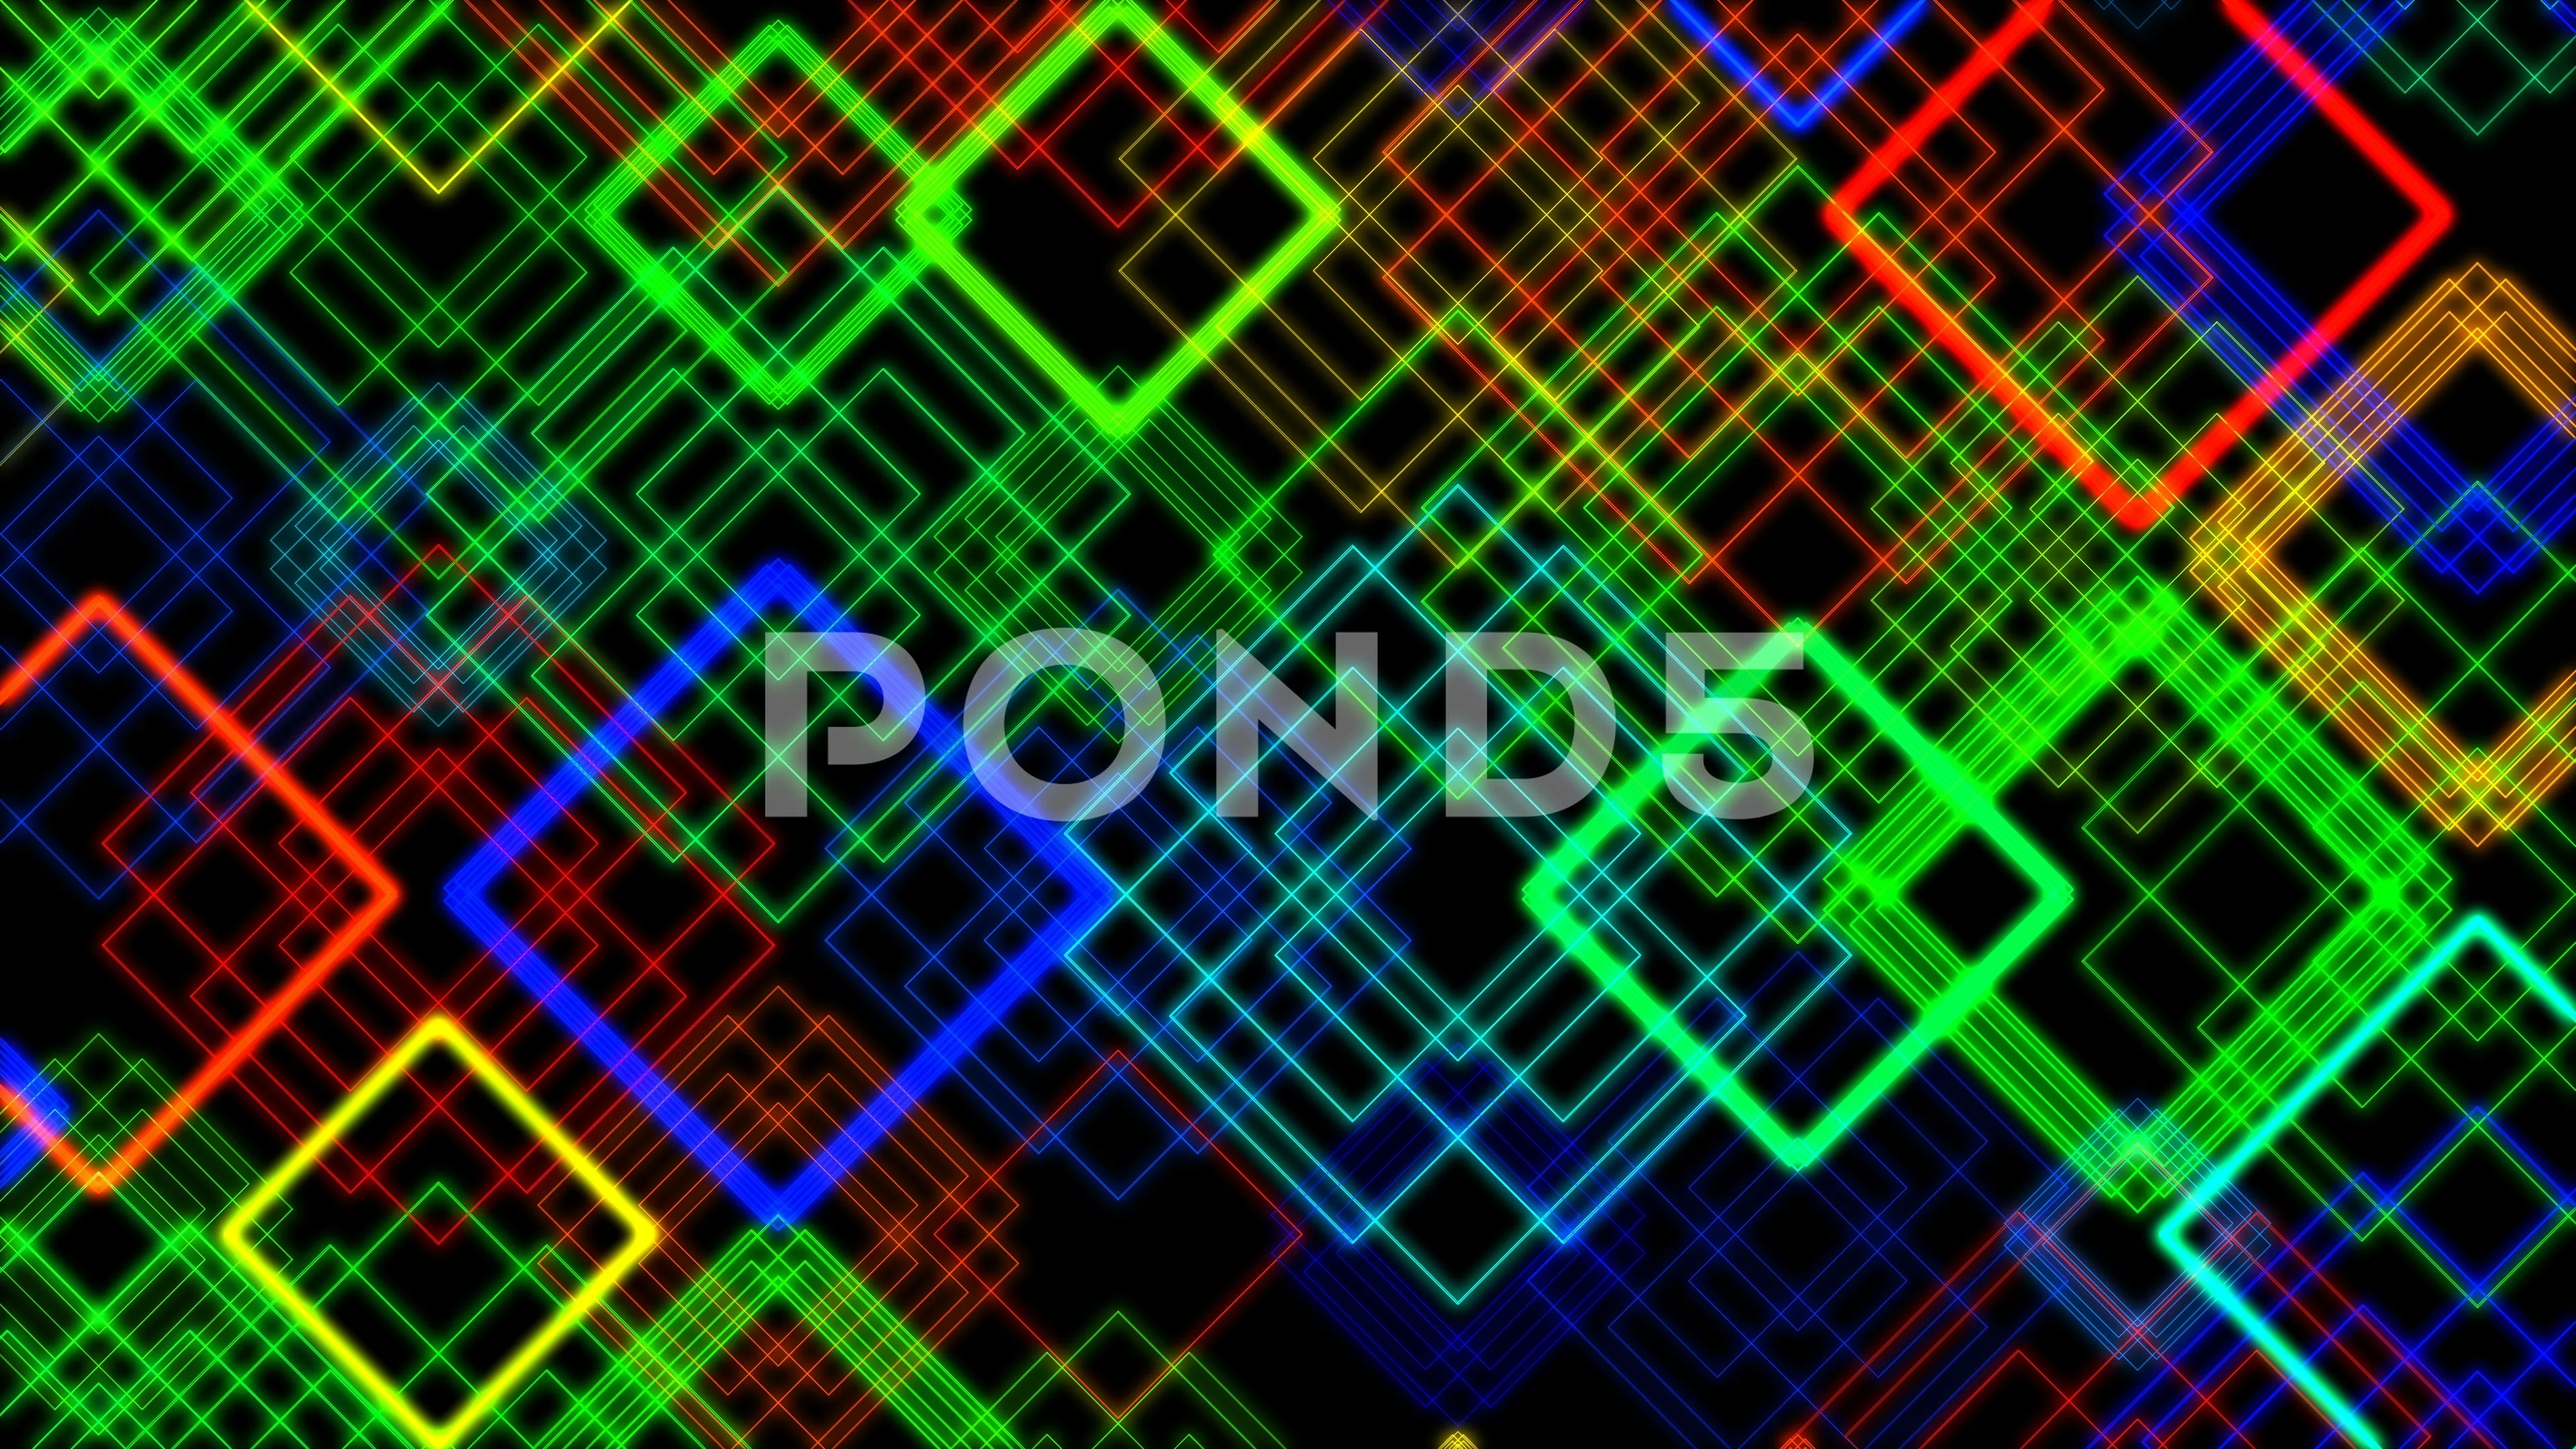 https://images.pond5.com/animation-multicolored-glowing-rectangles-091074454_prevstill.jpeg